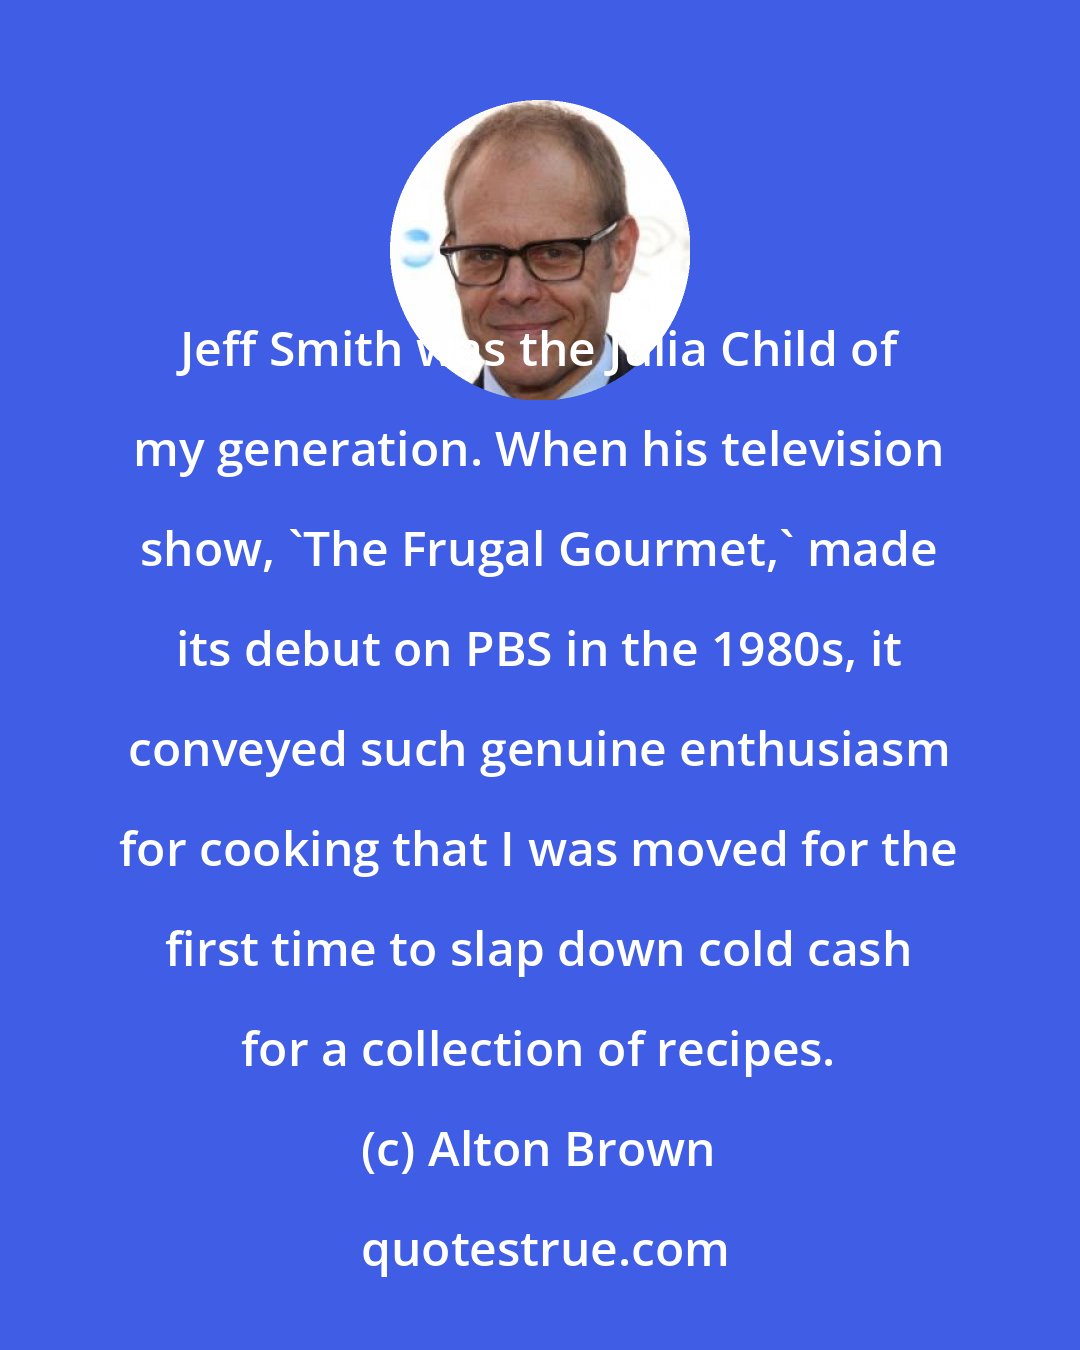 Alton Brown: Jeff Smith was the Julia Child of my generation. When his television show, 'The Frugal Gourmet,' made its debut on PBS in the 1980s, it conveyed such genuine enthusiasm for cooking that I was moved for the first time to slap down cold cash for a collection of recipes.